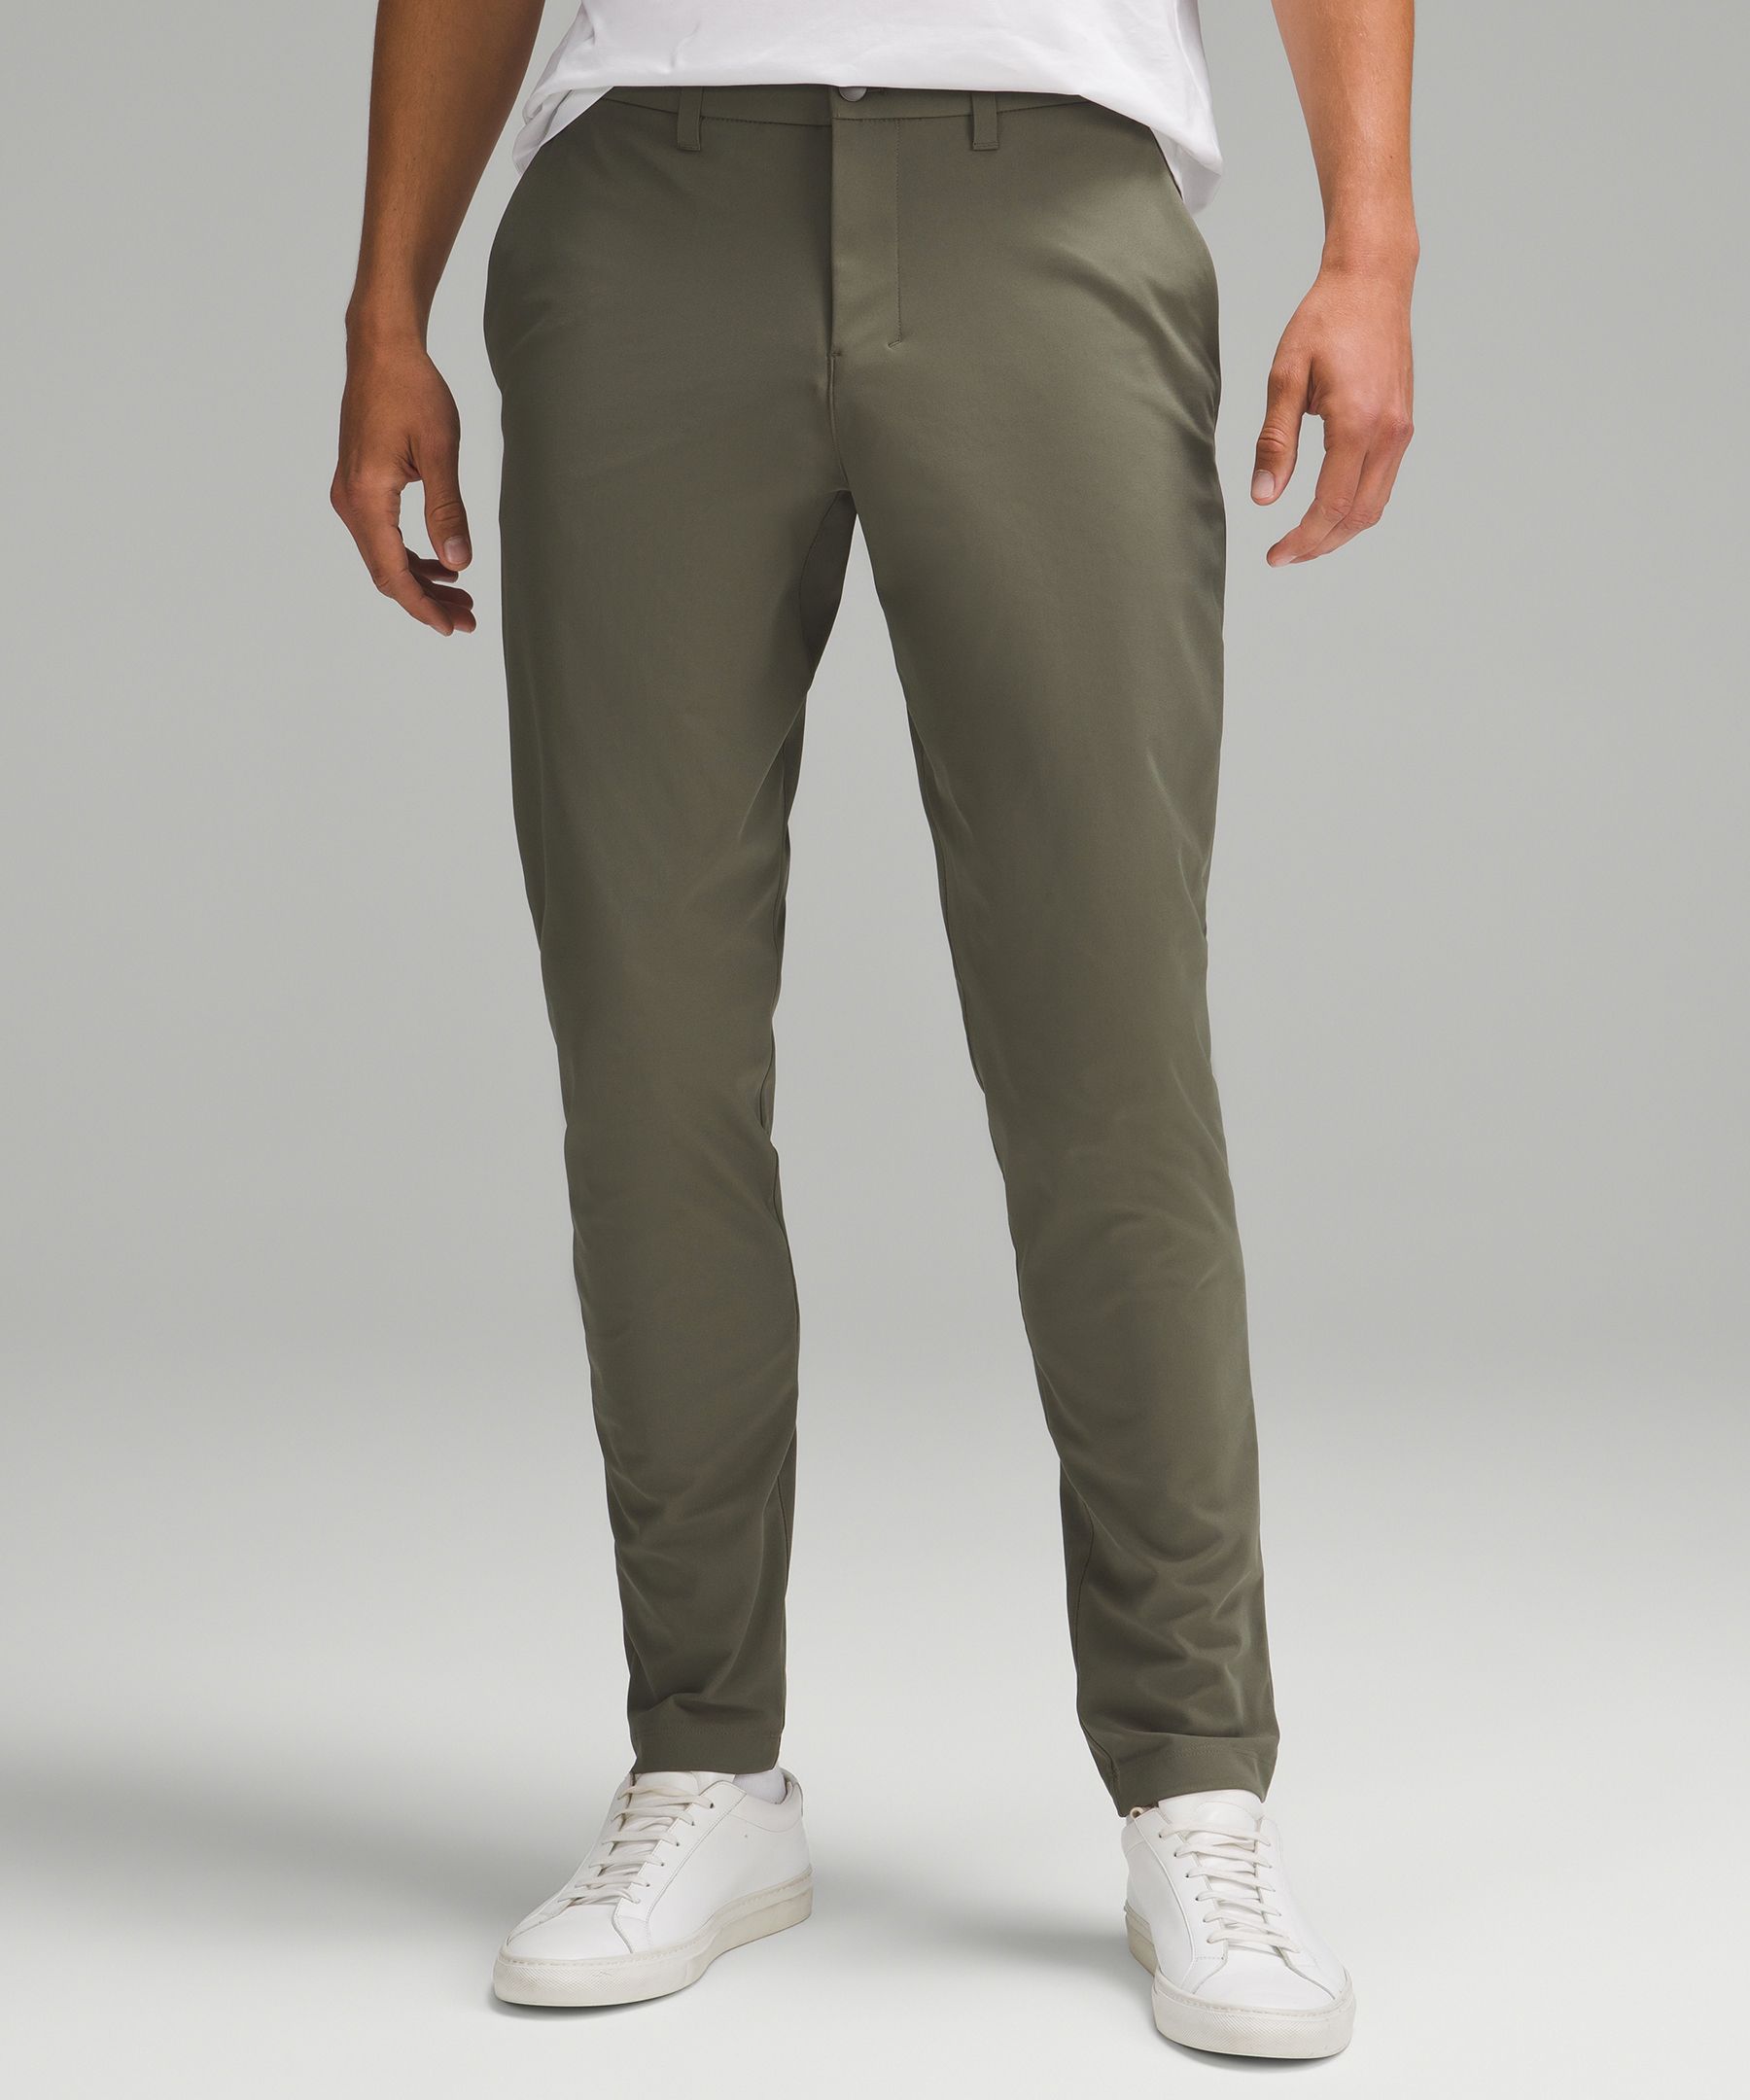 Lululemon athletica Stretch Cotton VersaTwill Relaxed-Fit Cargo Pant, Men's Trousers